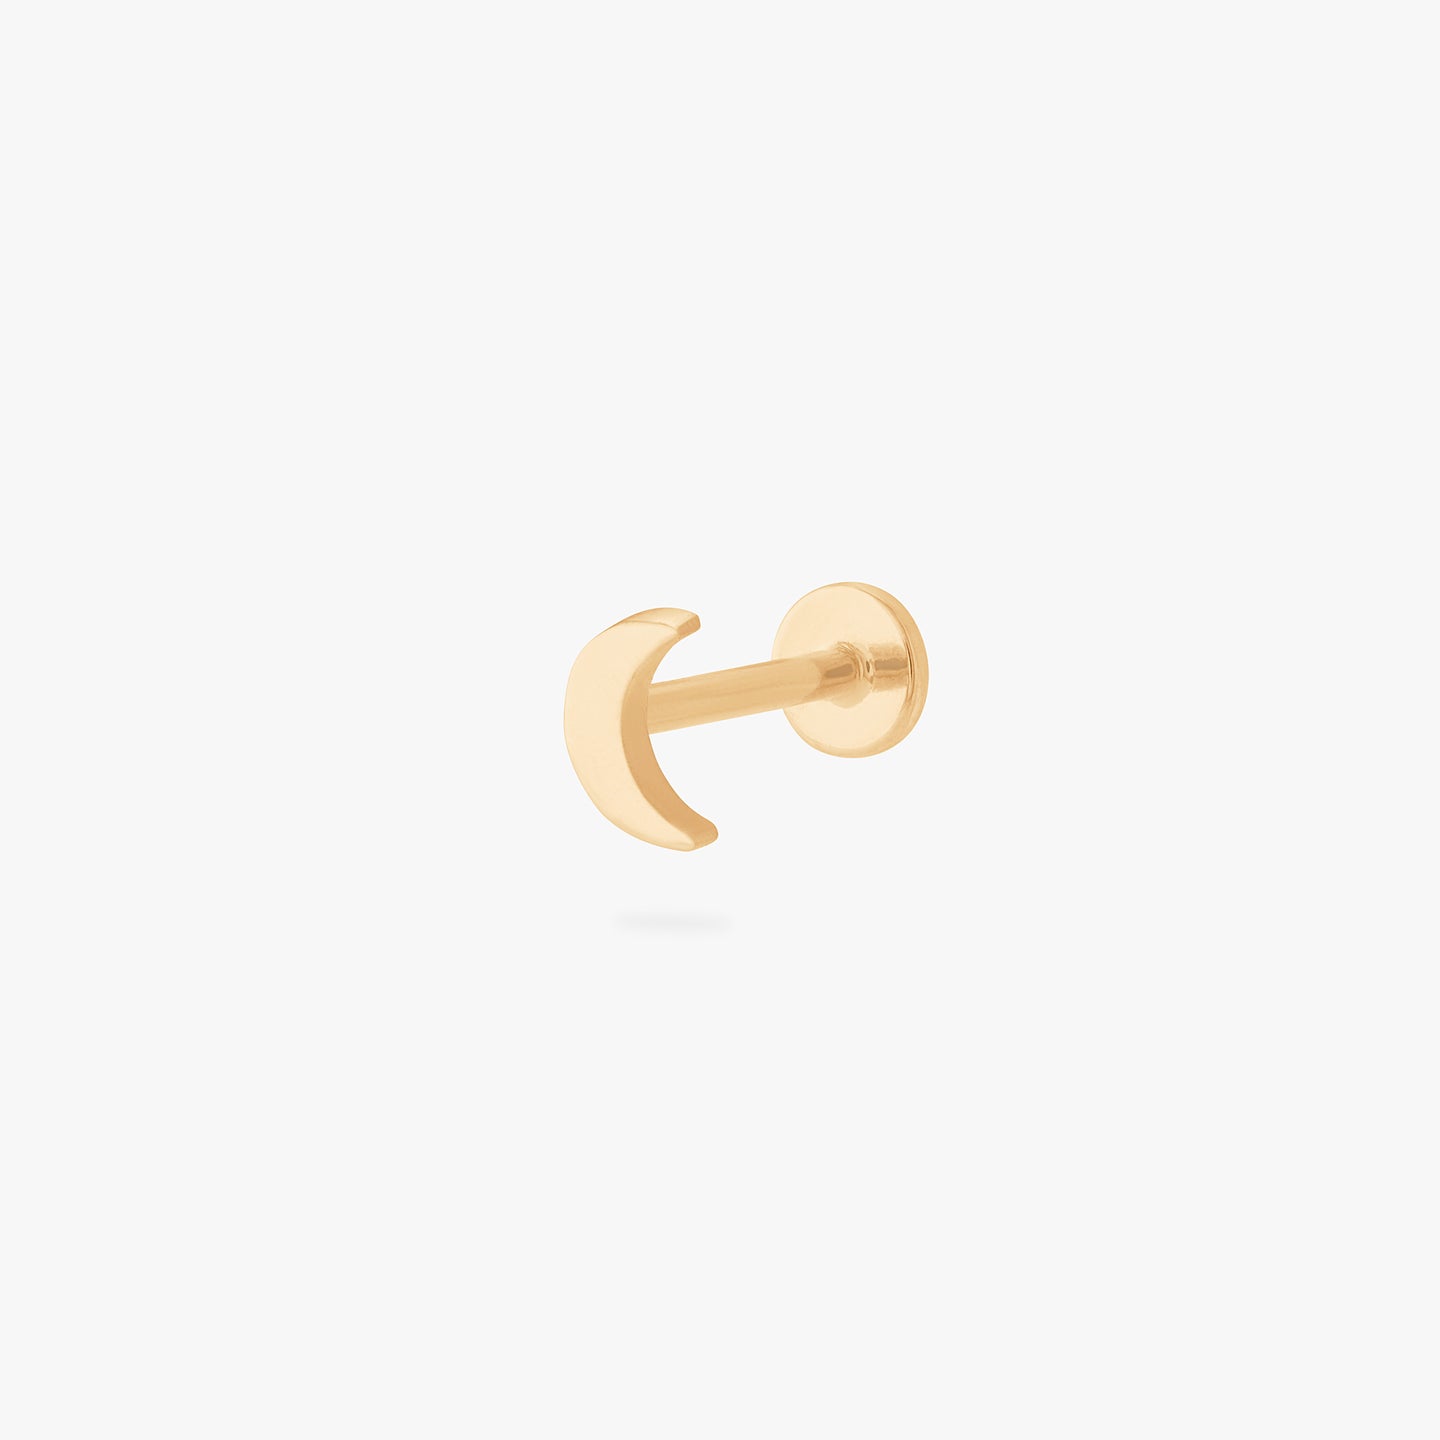 This is an image of a gold moon shaped flatback top with a gold labret with a circle disc with the 